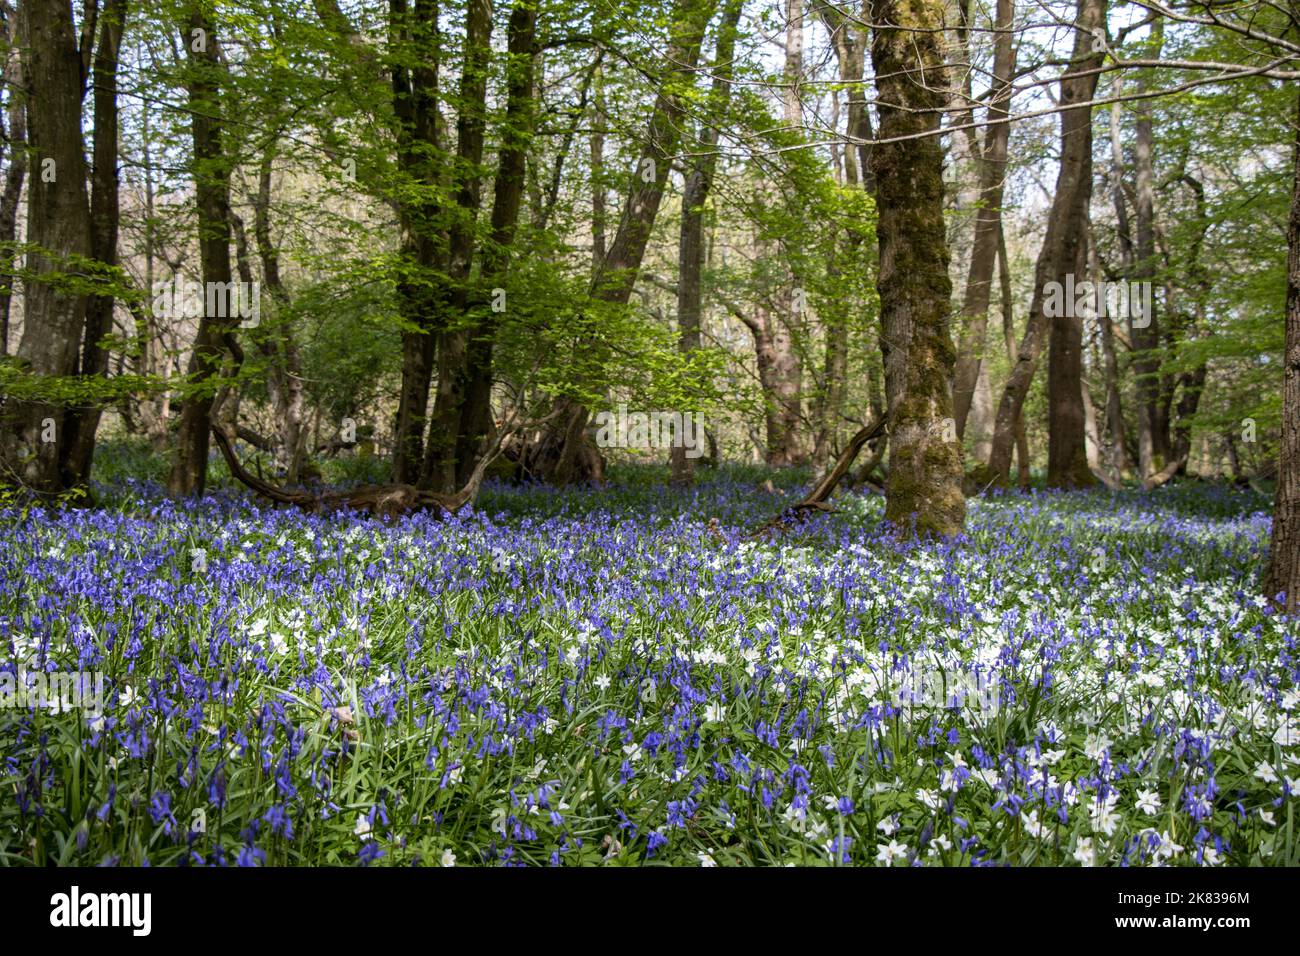 Carpet of bluebells in the woods at Arlington, East Sussex. Bluebell walk. Stock Photo